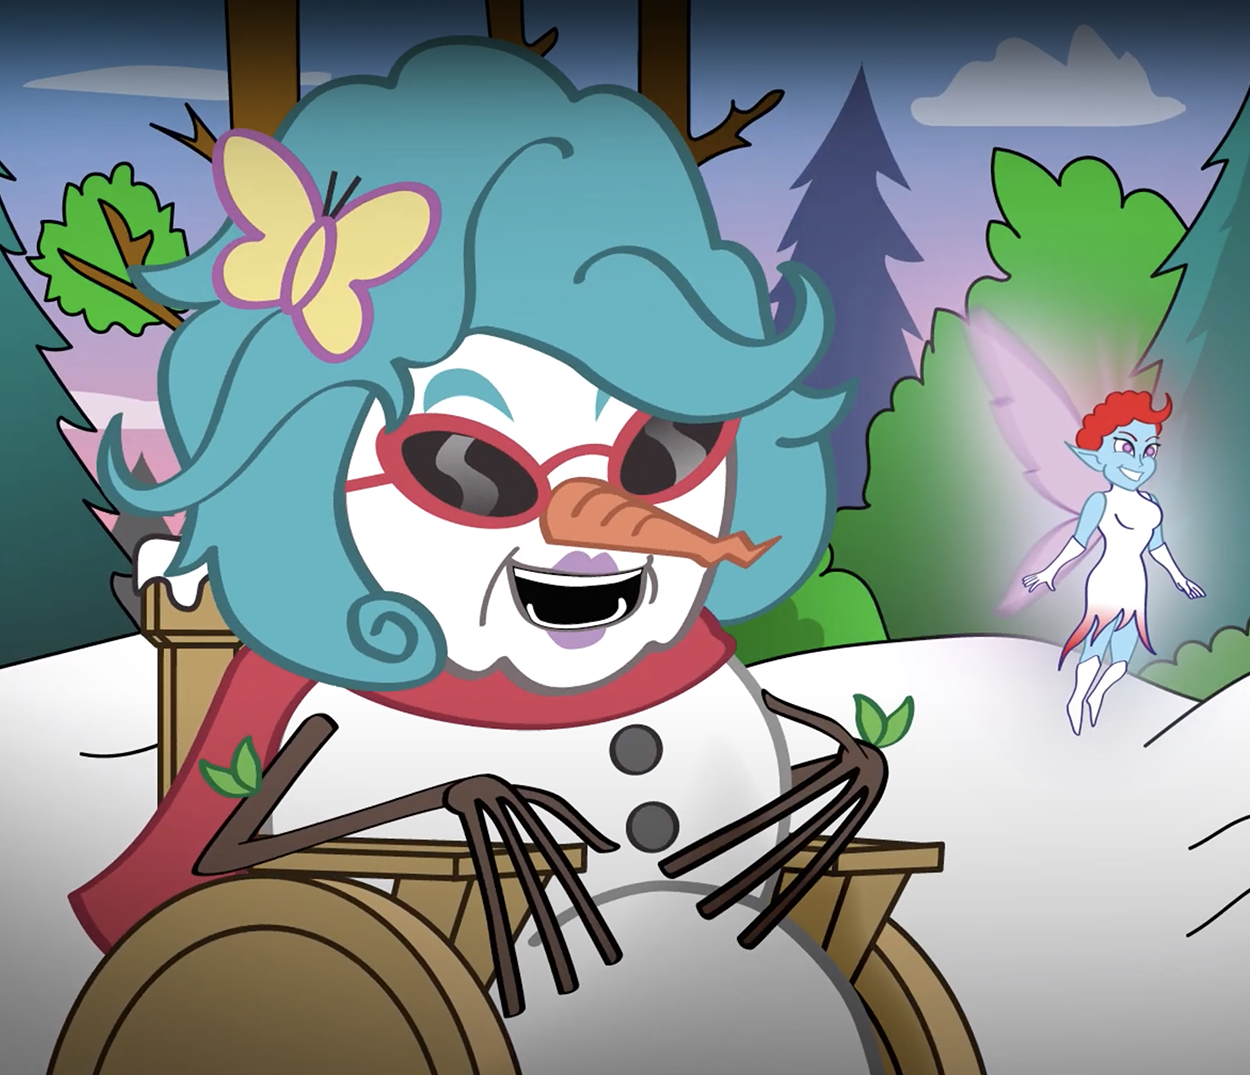 The colorful Magic Snowwoman uses a wheelchair and her fairy friend Little Ding flies alongside.